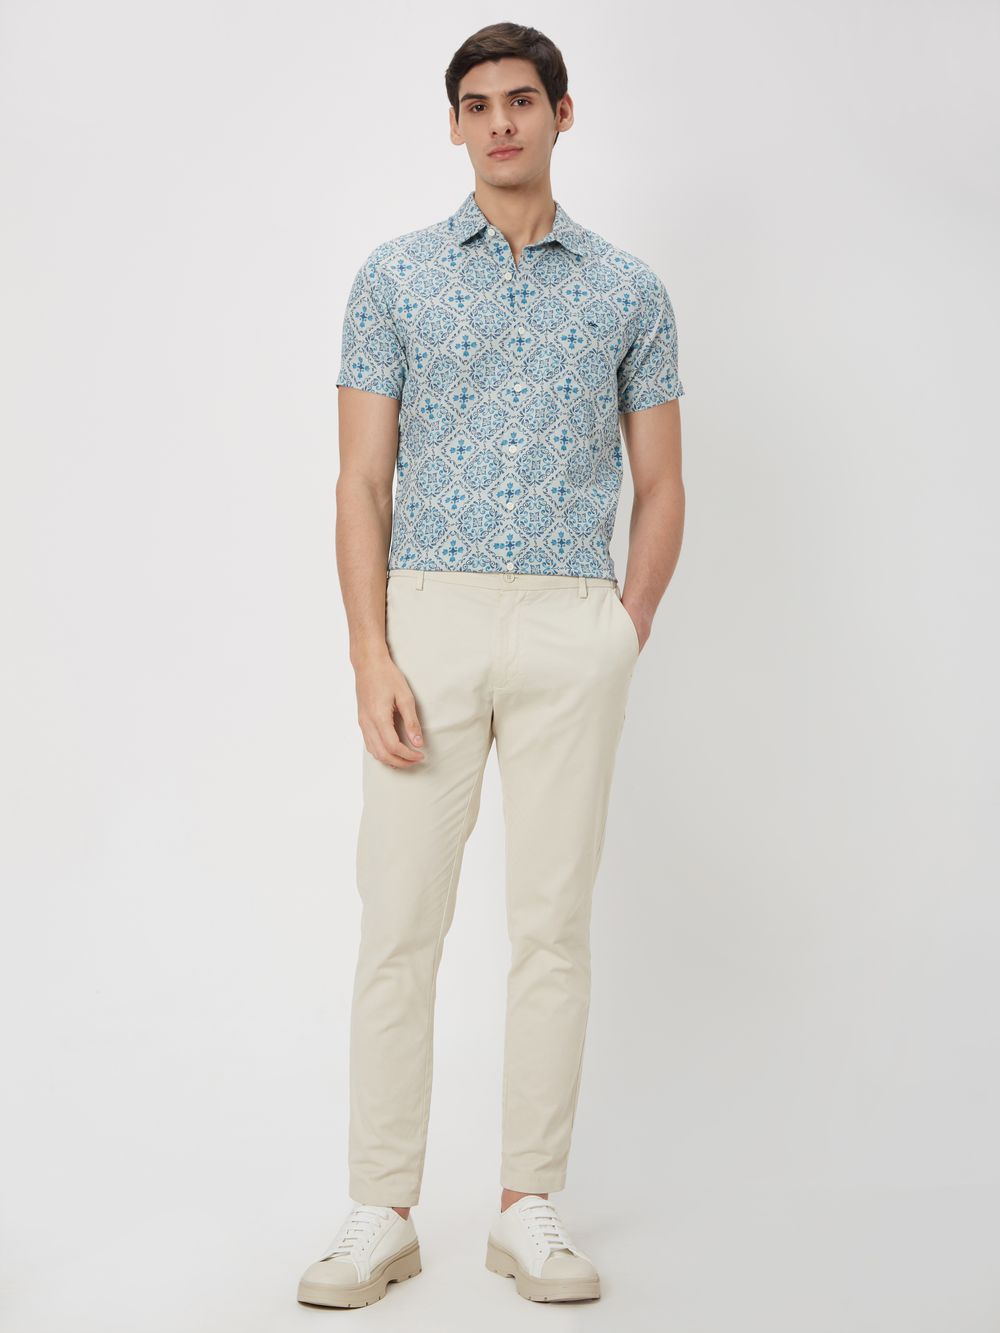 Turquoise Tileprint Slim Fit Casual Shirt